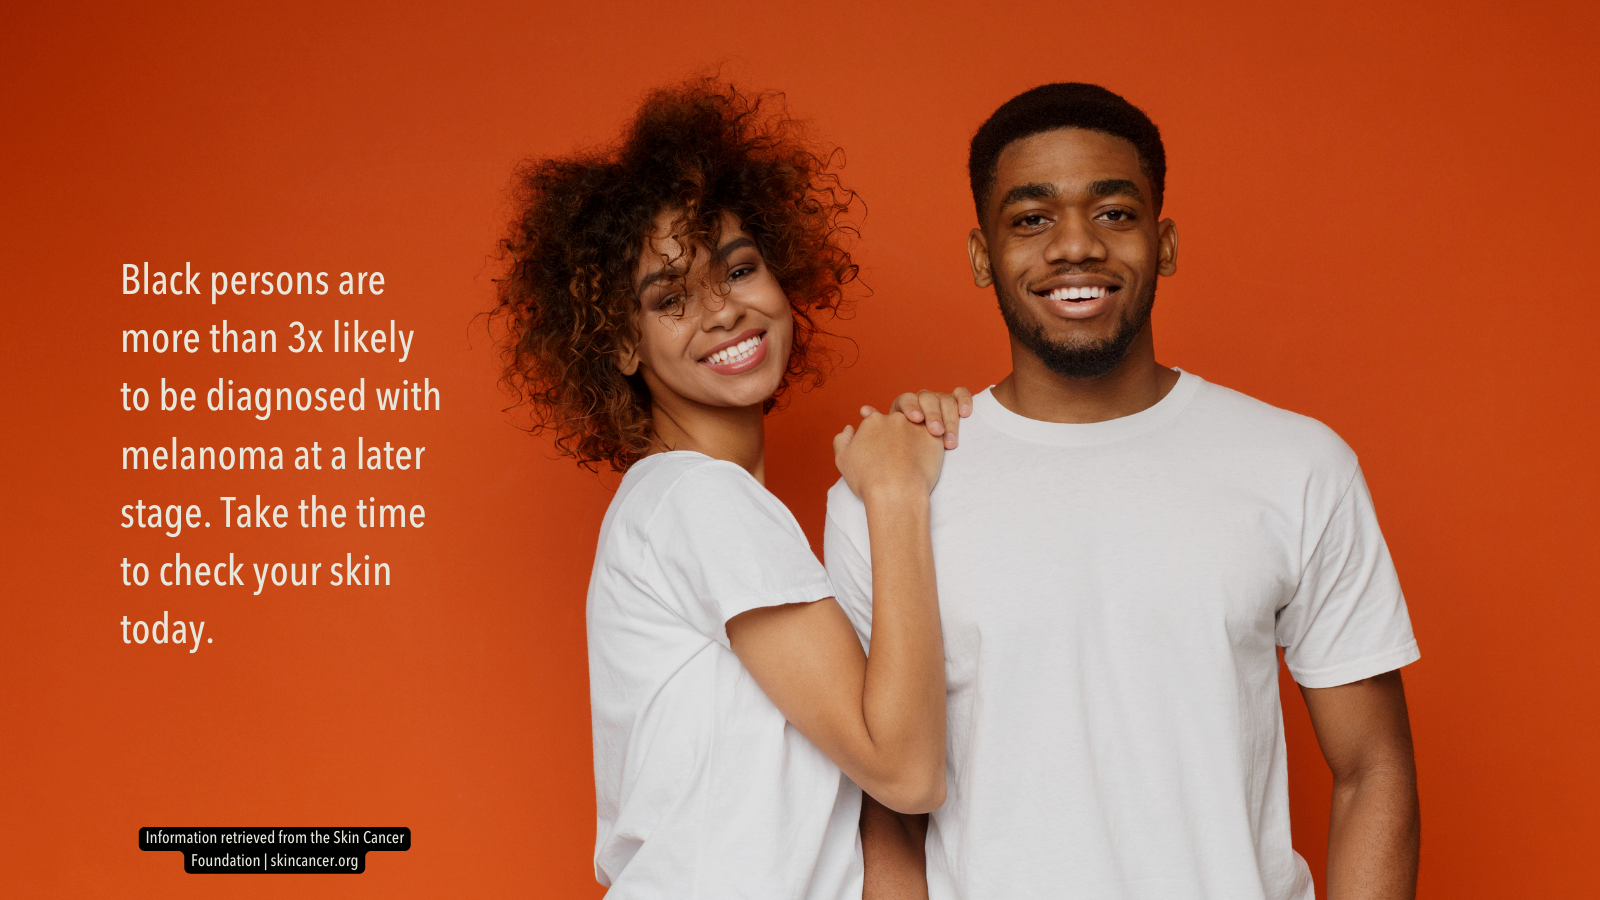 Image of young Black woman and man wearing white t-shirts standing in front of red background. Text reads: Black persons are more than 3x likely to be diagnosed with melanoma at a later stage. Take the time to check your skin today. 